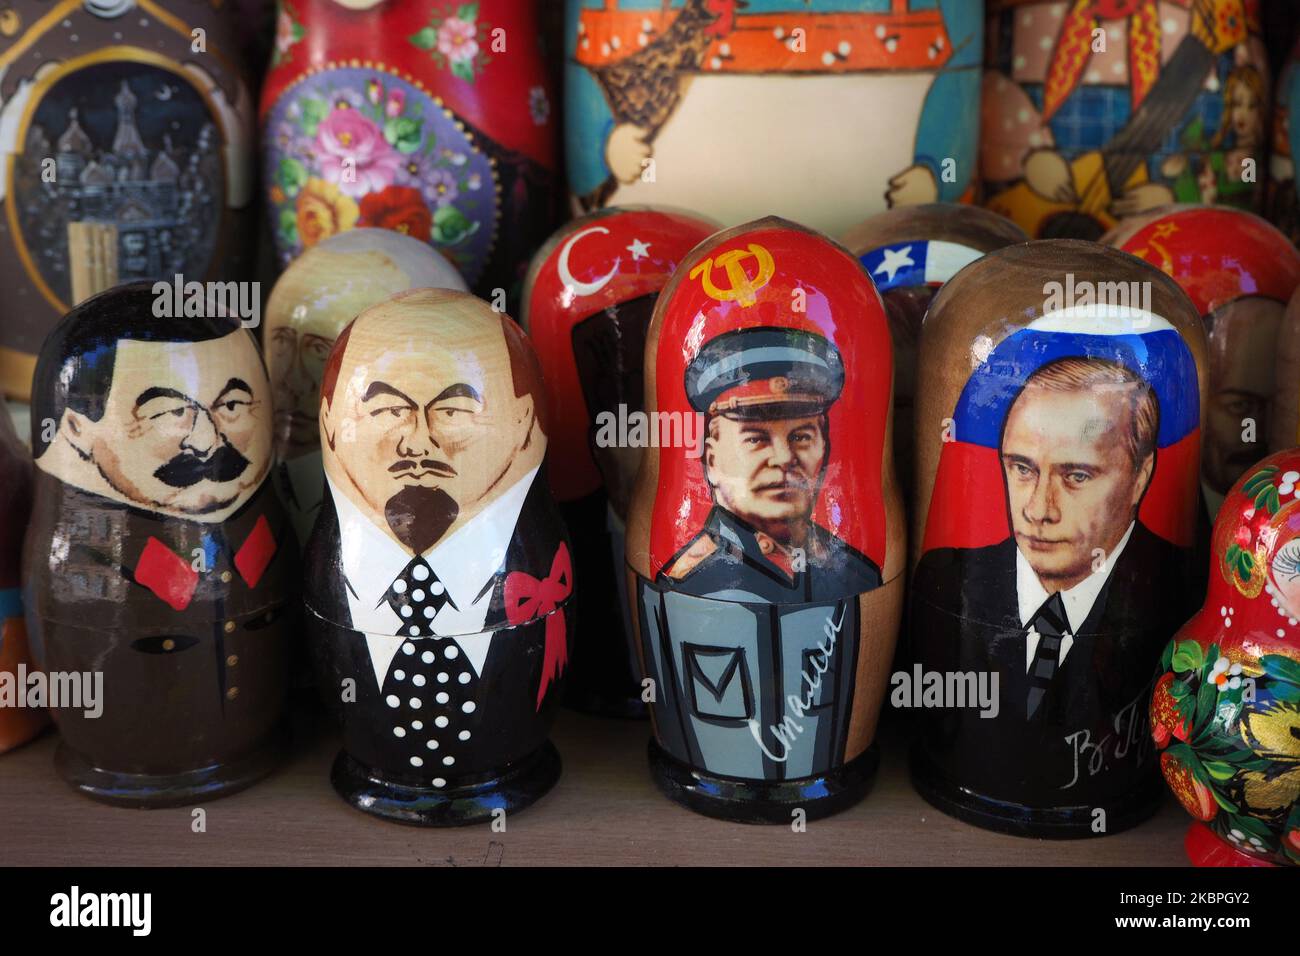 Painted Matryoshka dolls also known as Russian nesting dolls, bearing the faces of former leaders of the Soviet Union Josef Stalin and Vladimir Lenin and Russian President Vladimir Putin on display in a souvenir shop in St. Petersburg, Russia, on May 31, 2020. (Photo by Sergey Nikolaev/NurPhoto) Stock Photo